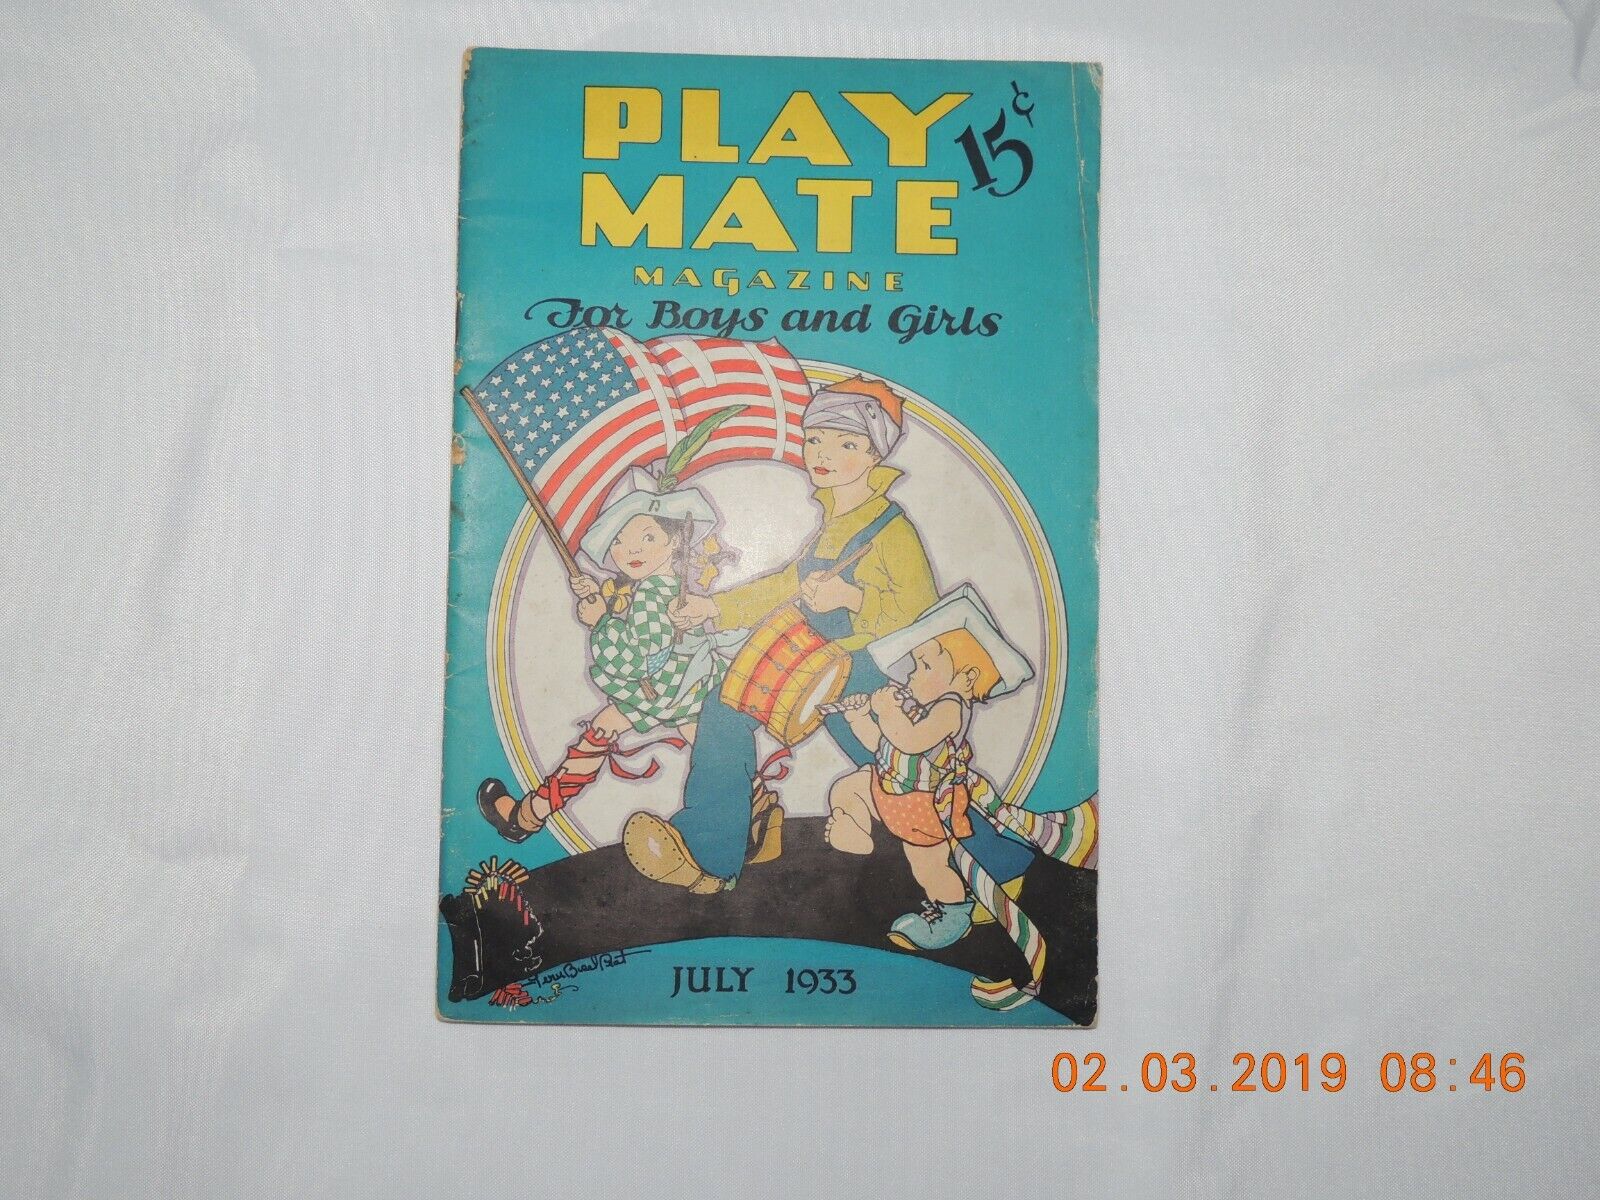 Vintage 1933 Children\'s Playmate Magazine for Boys and Girls